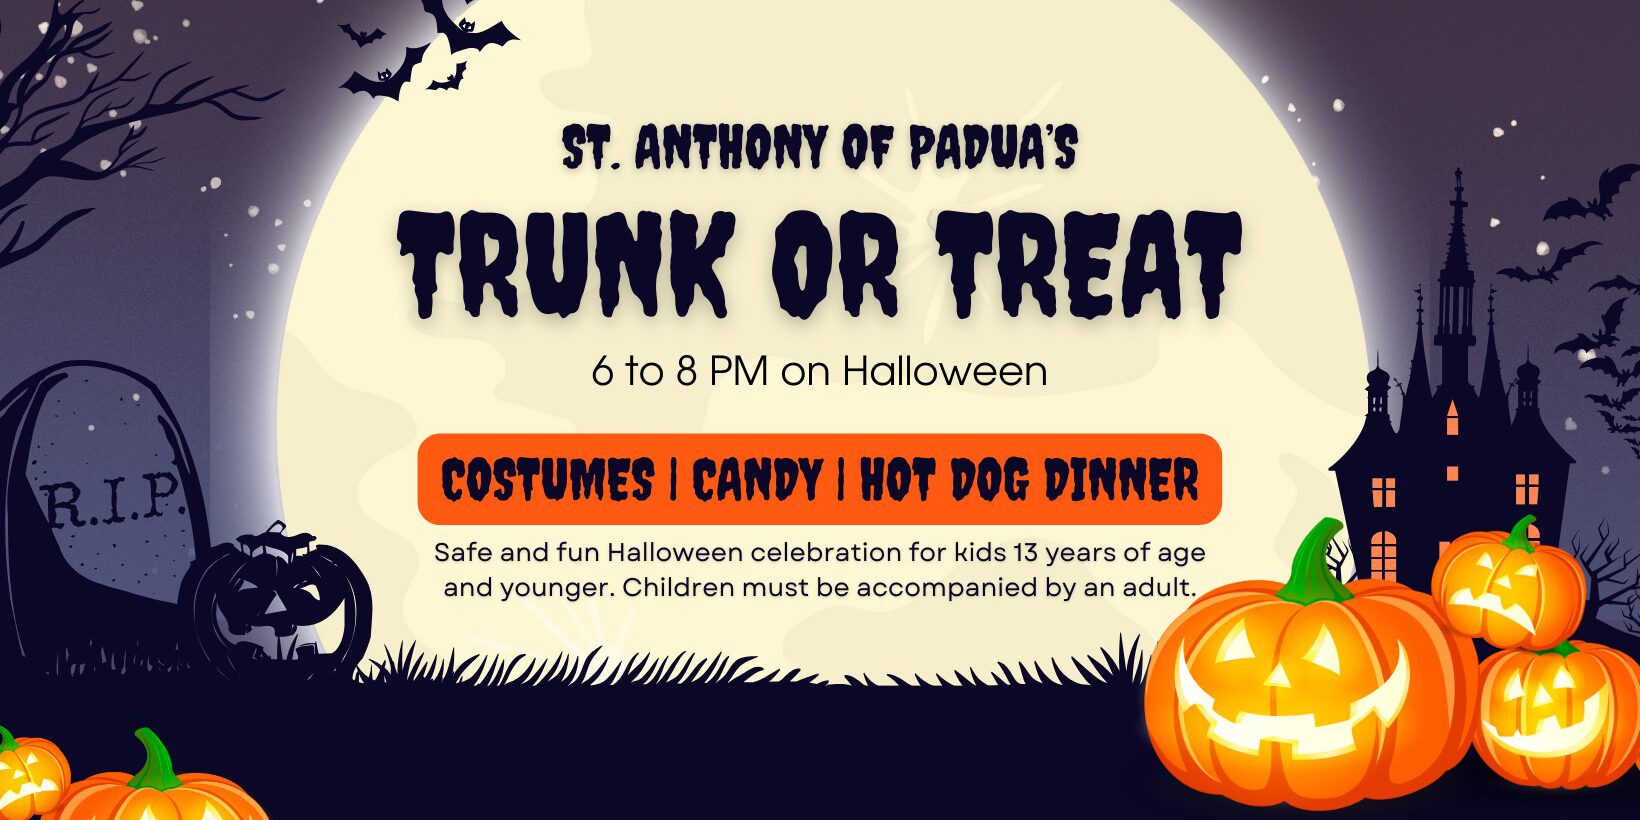 St. Anthony of Padua's Trunk or Treat